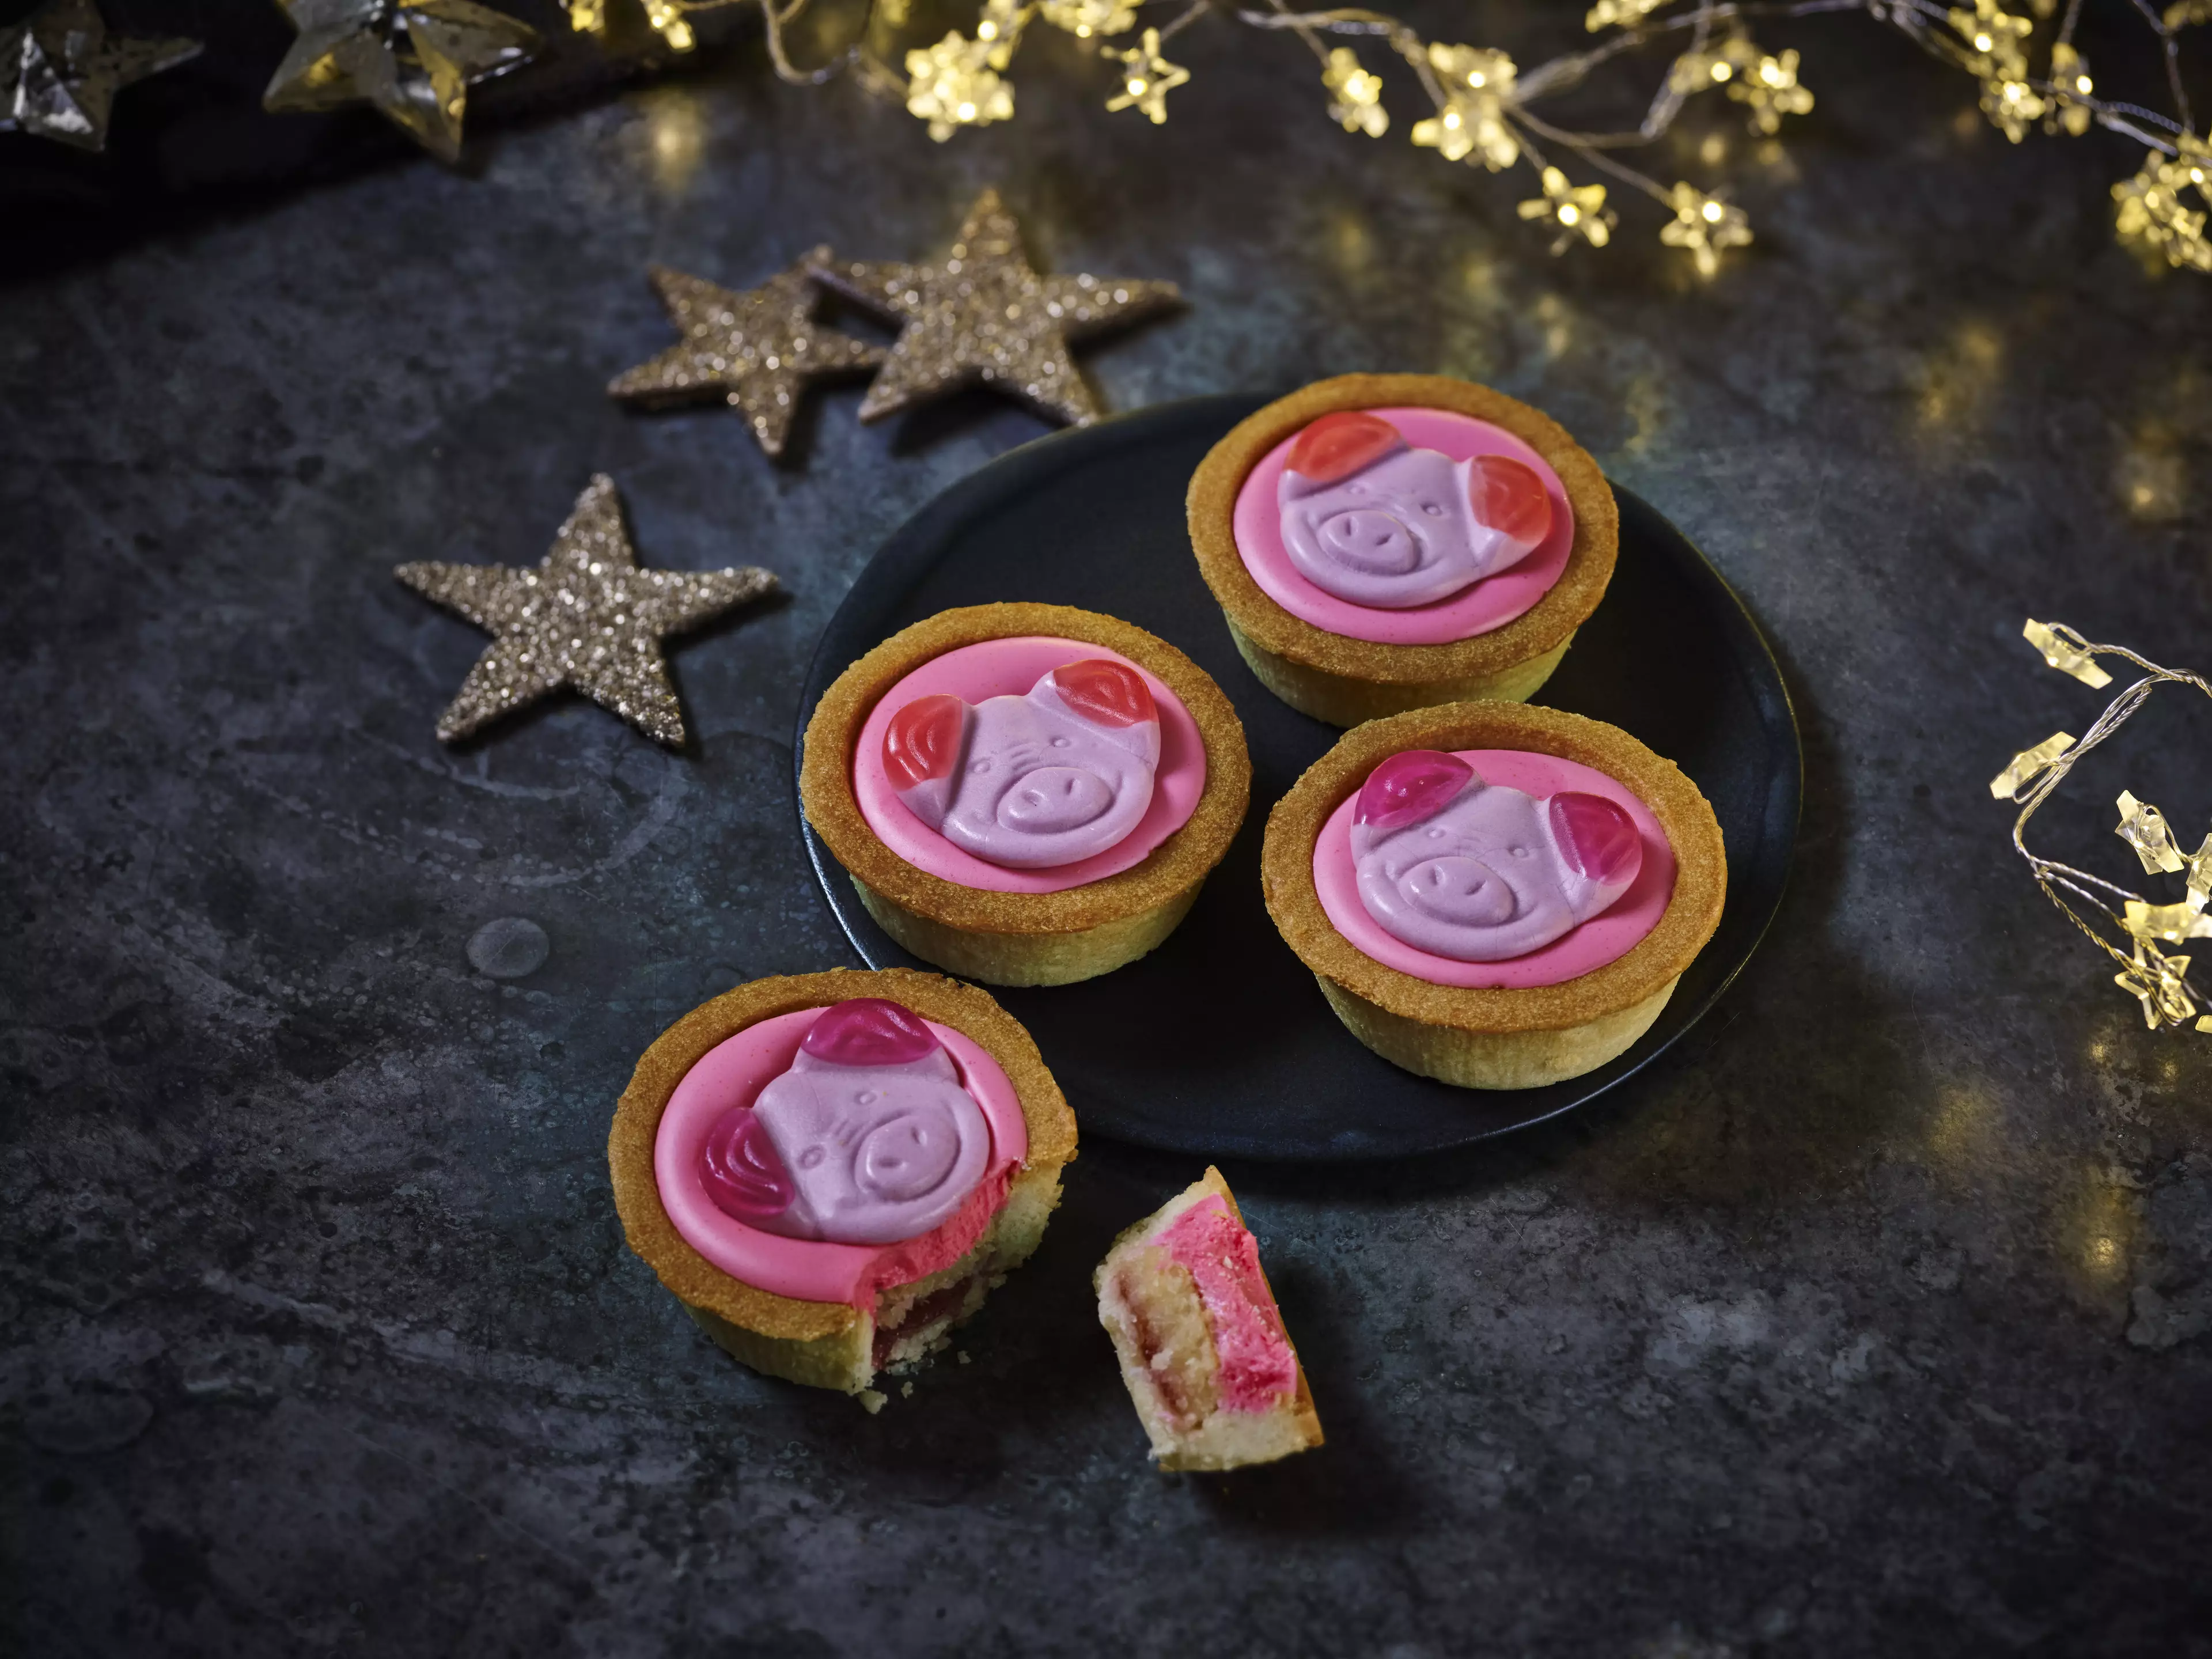 The mince pies will look so pretty in your Christmas spread (